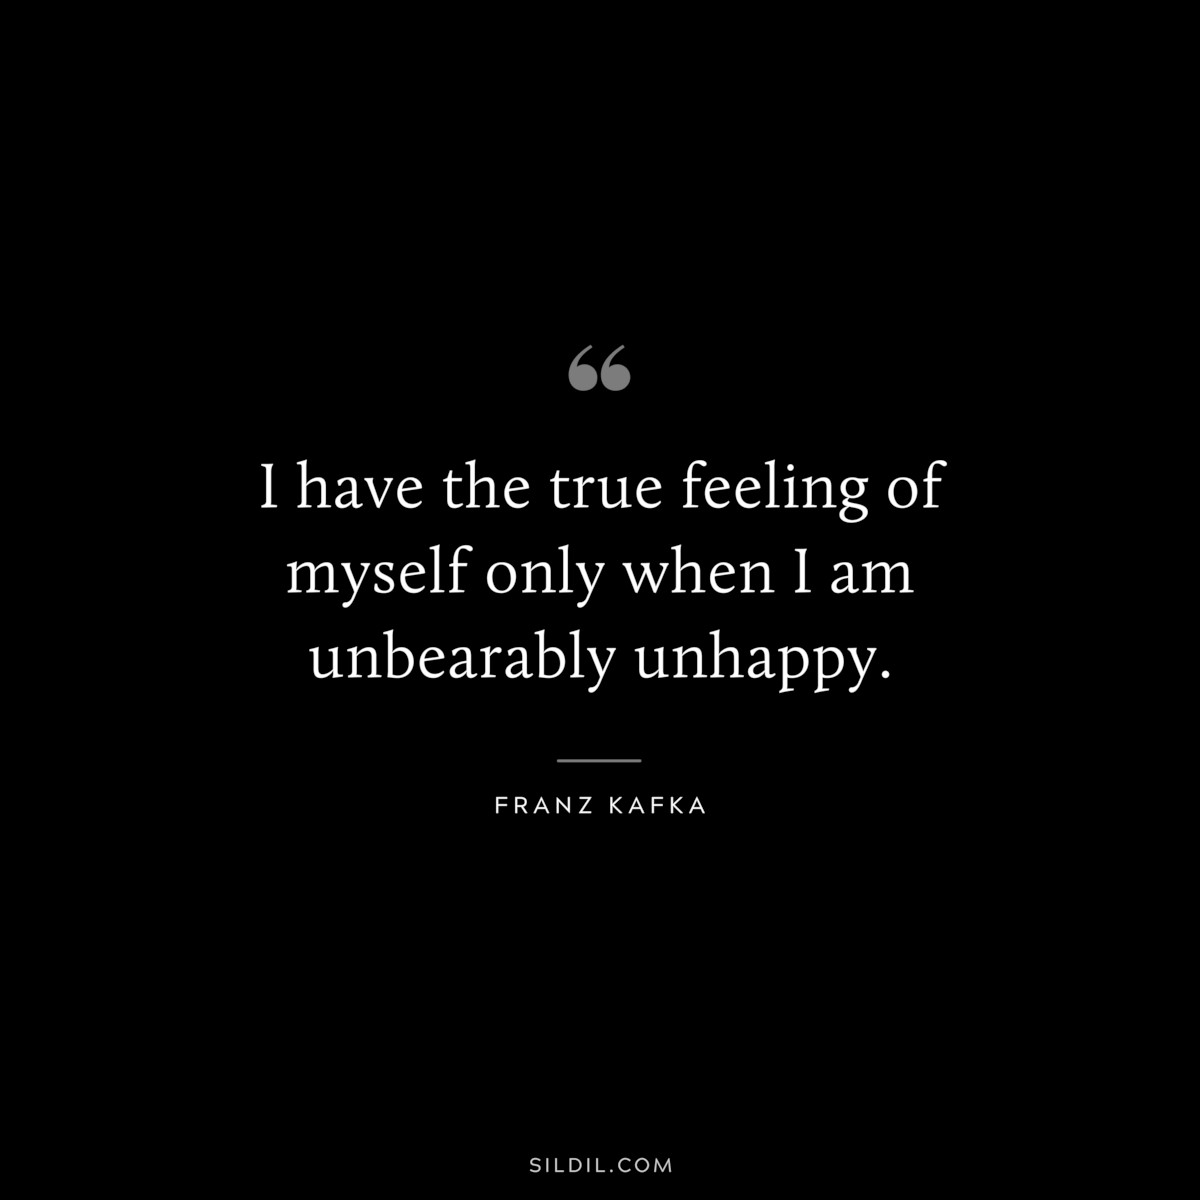 I have the true feeling of myself only when I am unbearably unhappy. ― Franz Kafka